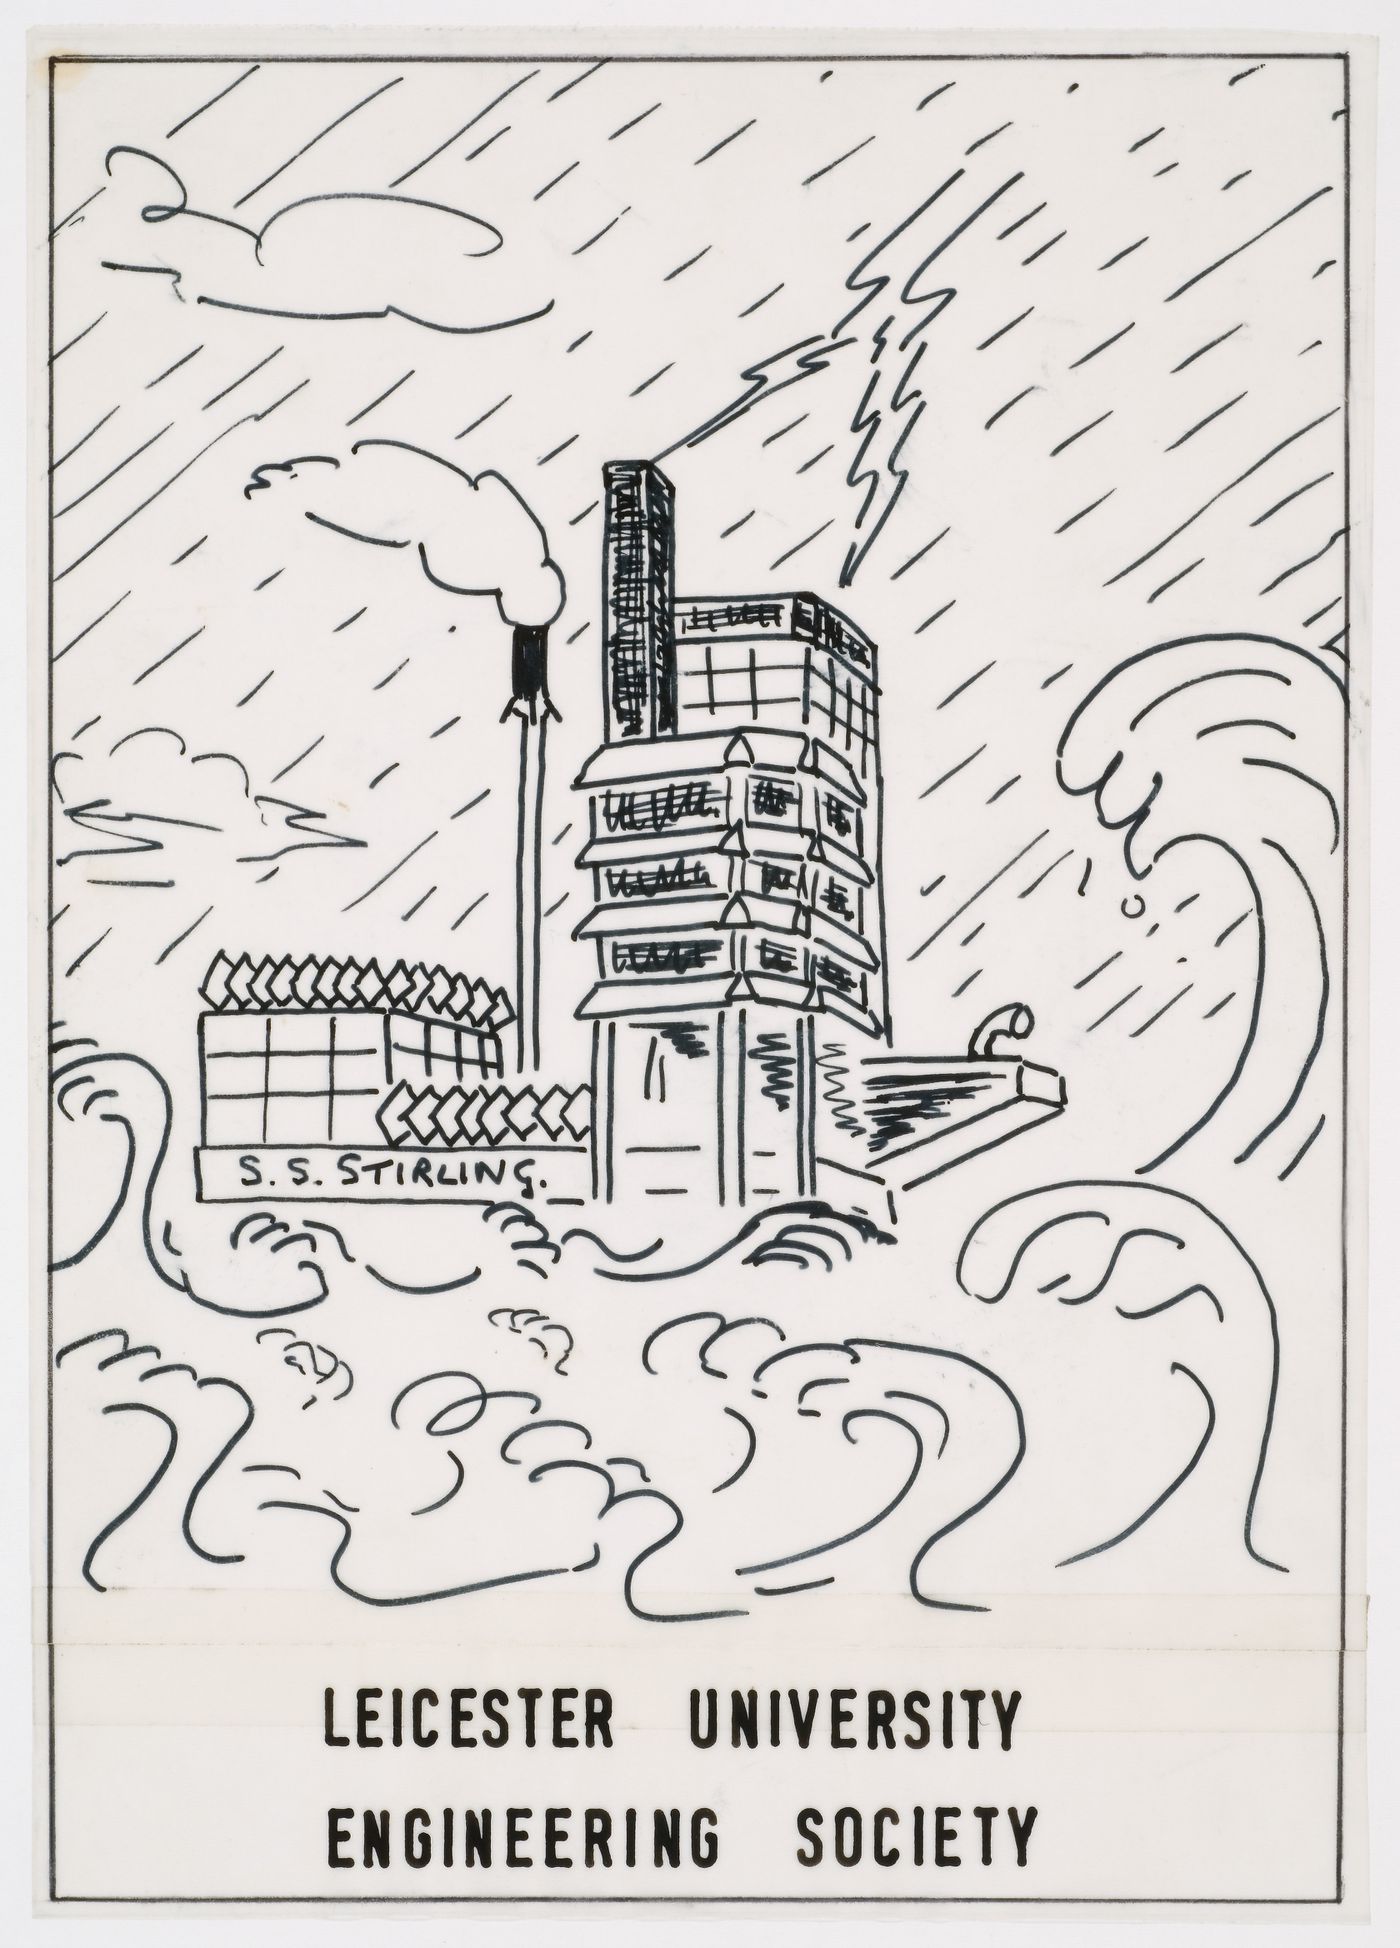 Caricature of the Leicester University Engineering Building as a ship, drawn by a student for a menu cover for the first annual dinner of the Engineering Society